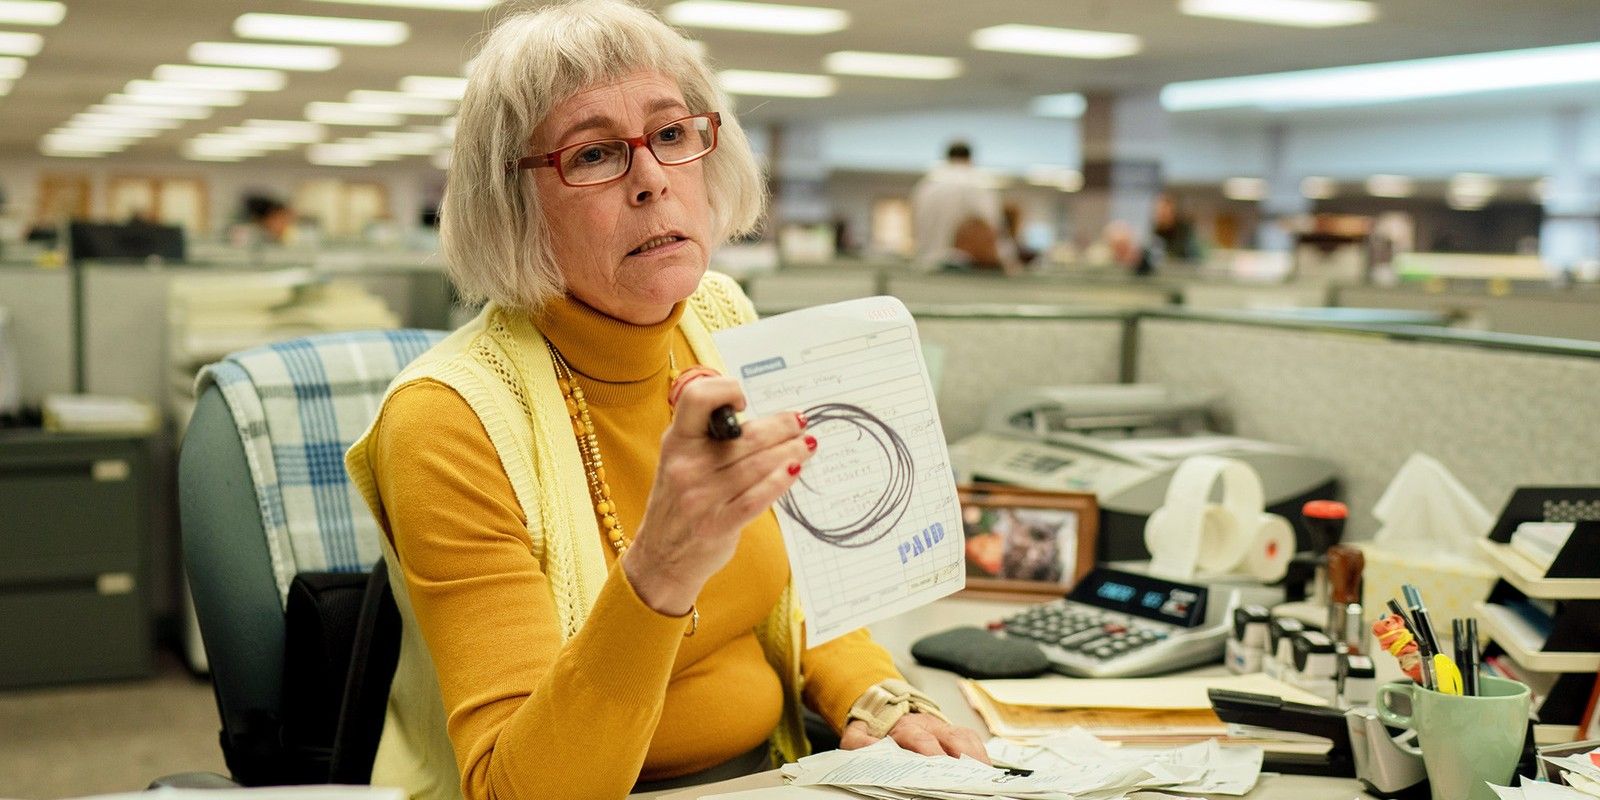 Deirdre Beaubeirdre (Jamie Lee Curtis) holds up a drawing of a circle at the IRS office in Everything Everywhere All at Once.